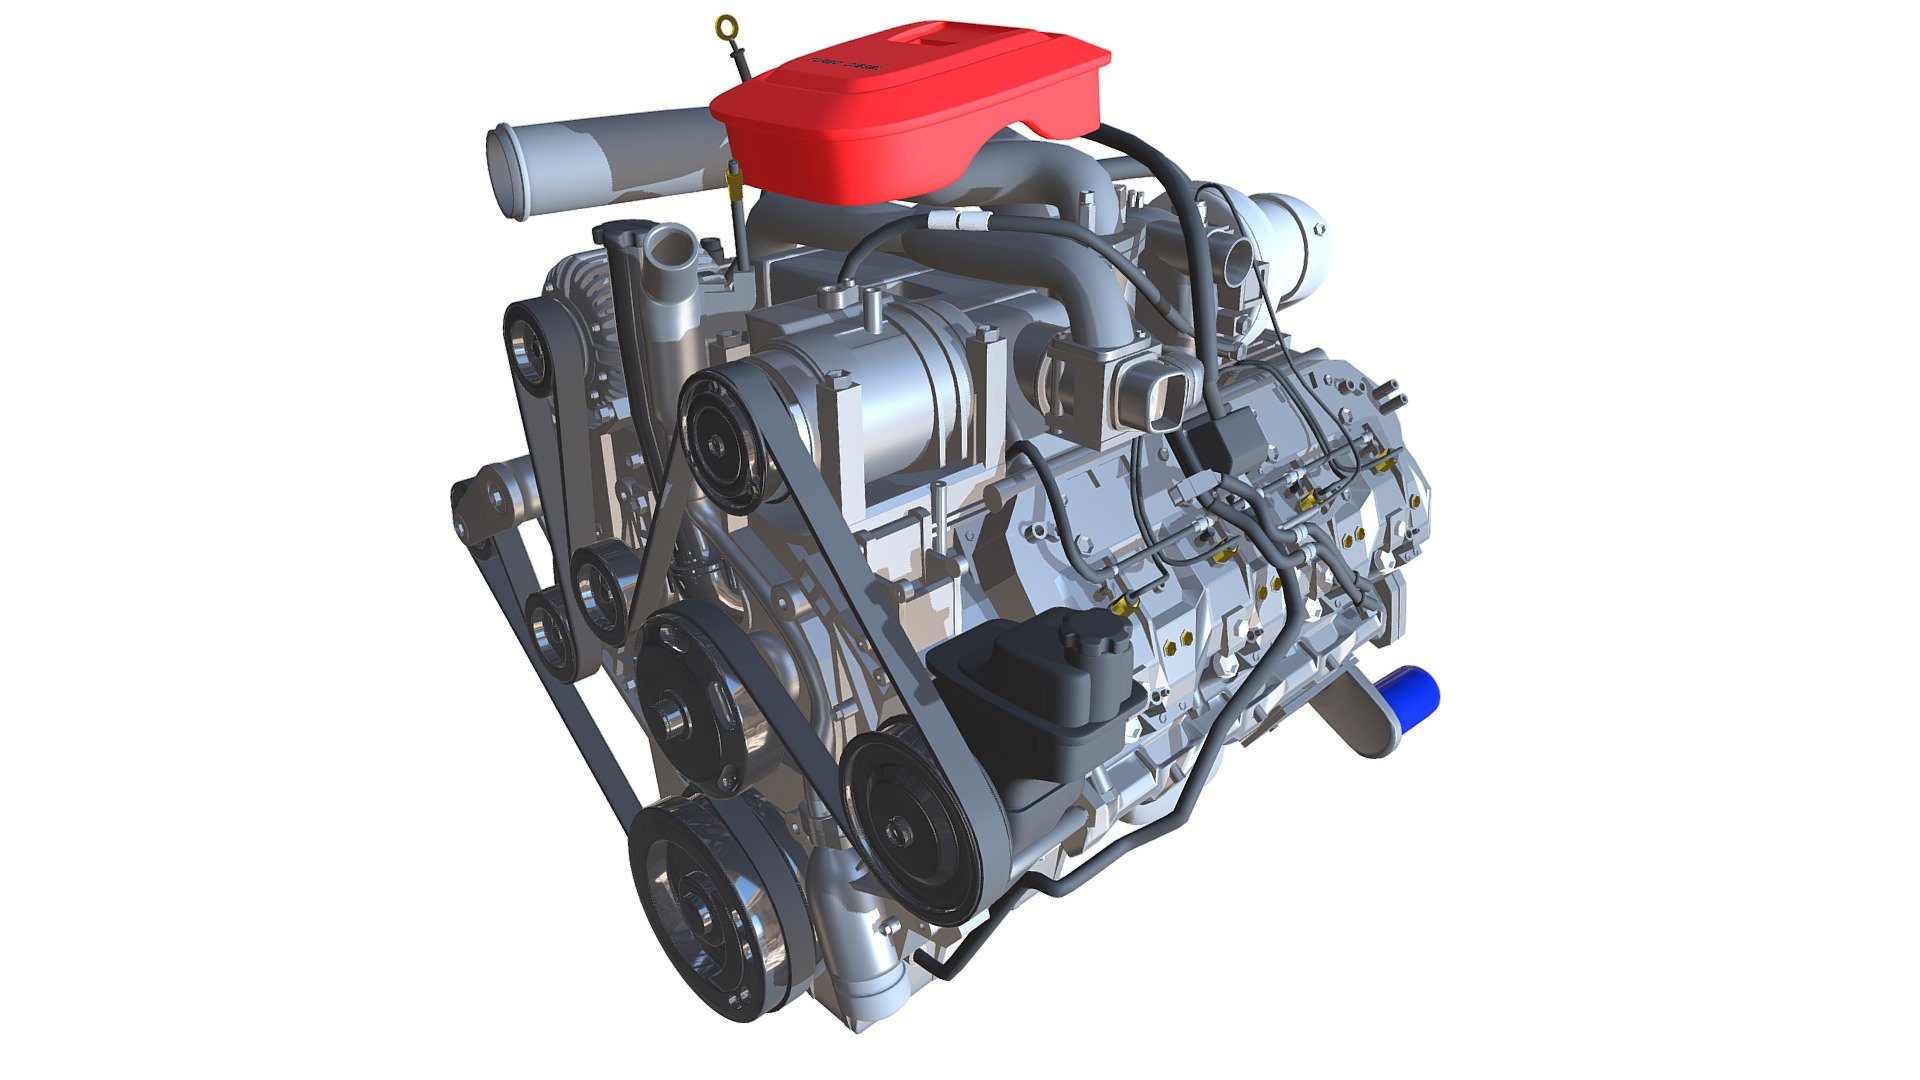 Detailed 3d model of car engine.

Included Formats:

3ds Max - Standard

3ds Max - V-Ray

Cinema 4D

Lightwave

Softimage

Maya

Rhino

3DS

AutoCAD drawing

DXF

Autodesk FBX

OBJ

OpenFlight

VRML - Car Engine - Buy Royalty Free 3D model by 3DHorse 3d model